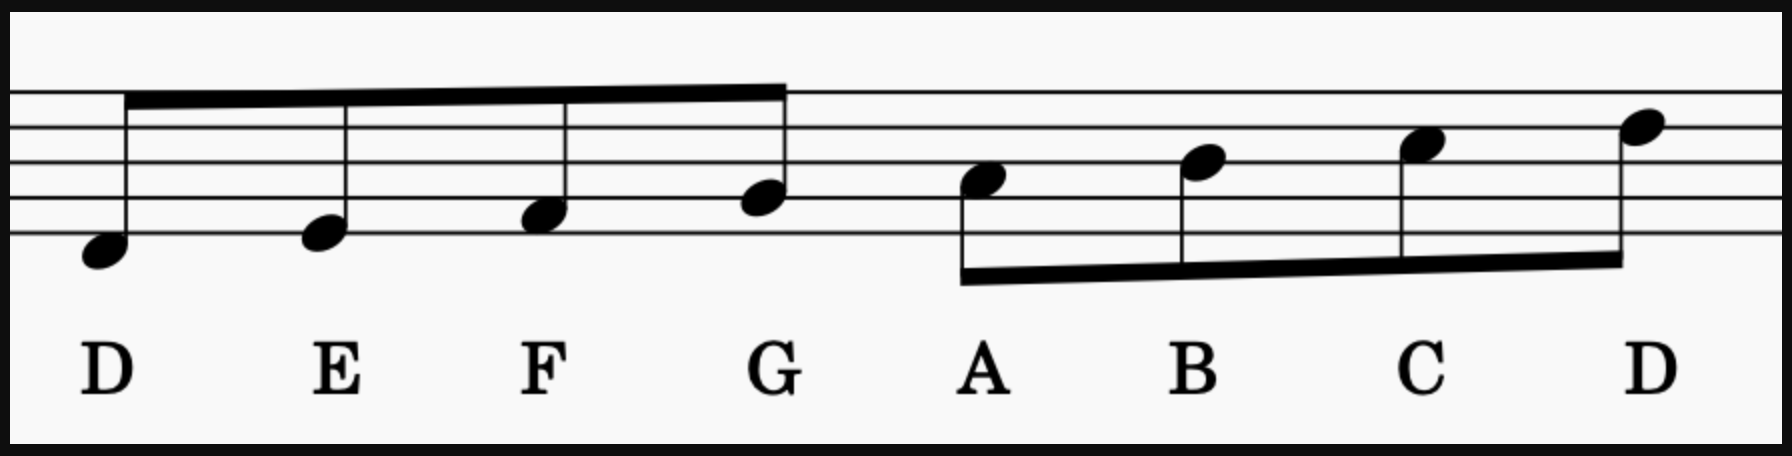 D Dorian Scale, or C major starting on D